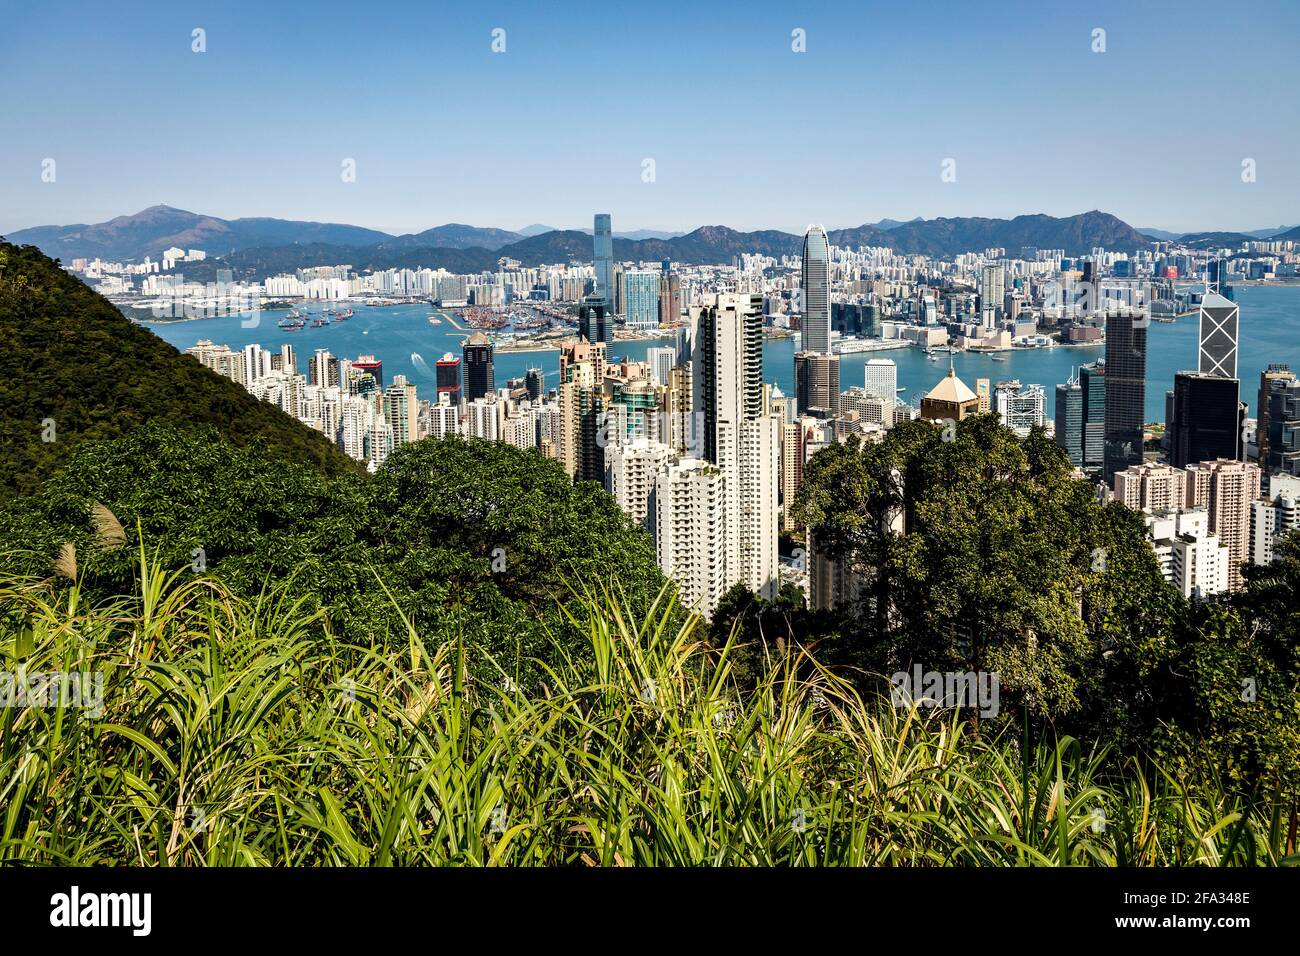 View across Hong Kong from Victoria Peak. Popular travel destination. Harbour and high-rise buildings dominate the skyline landscape. Stock Photo